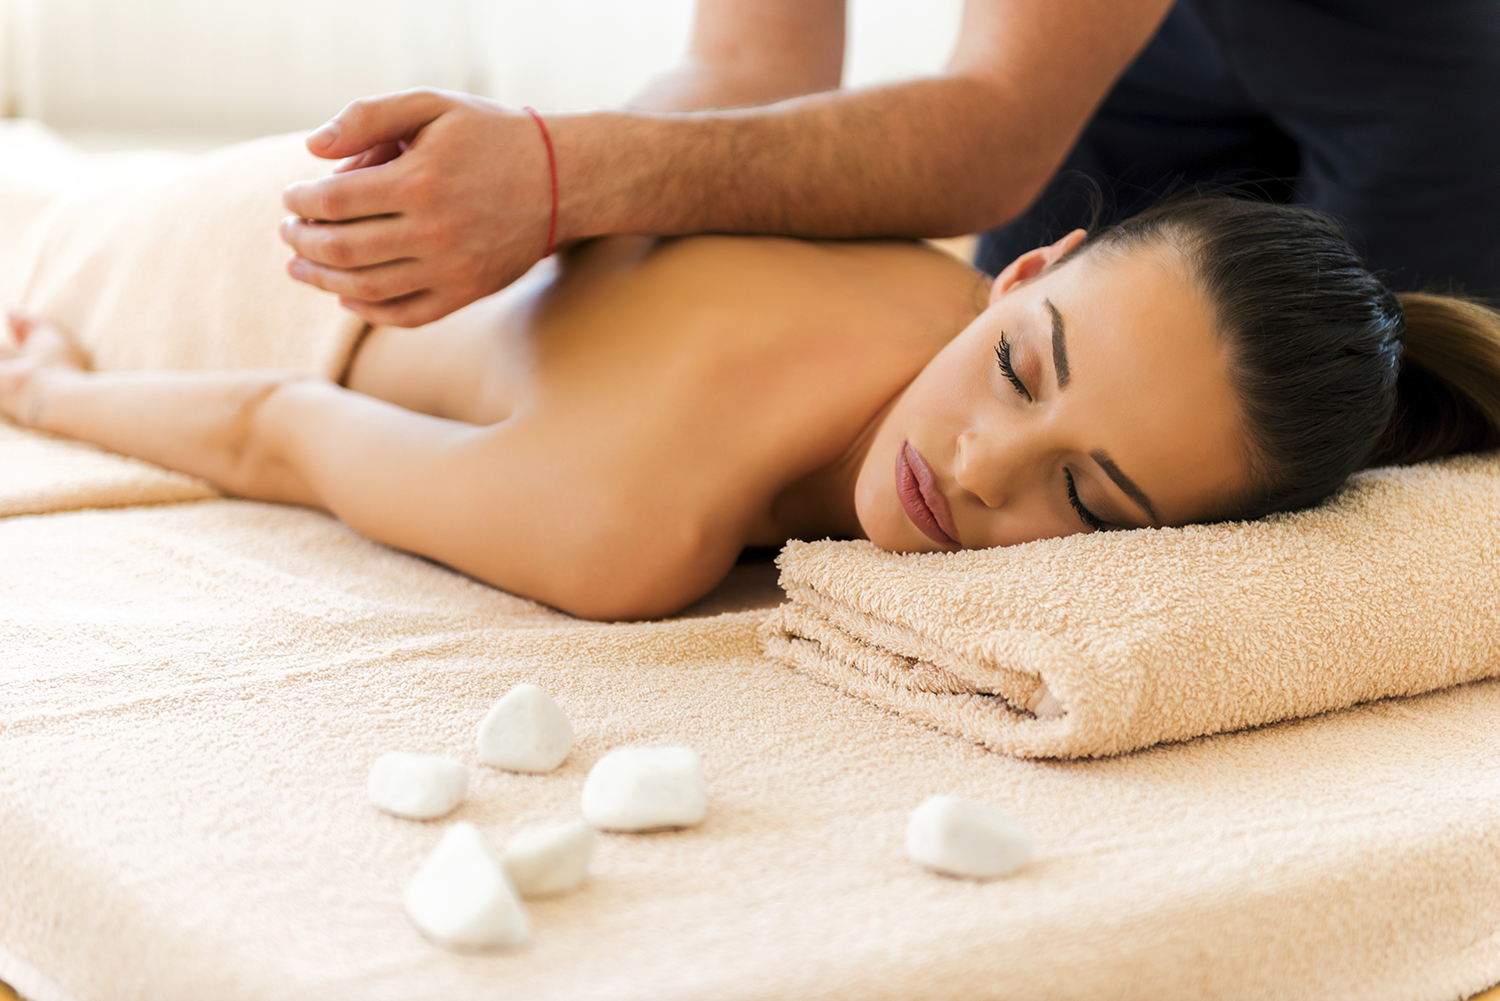 Love a wonderful business trip massage thanks to the assistance of the experts in the area post thumbnail image